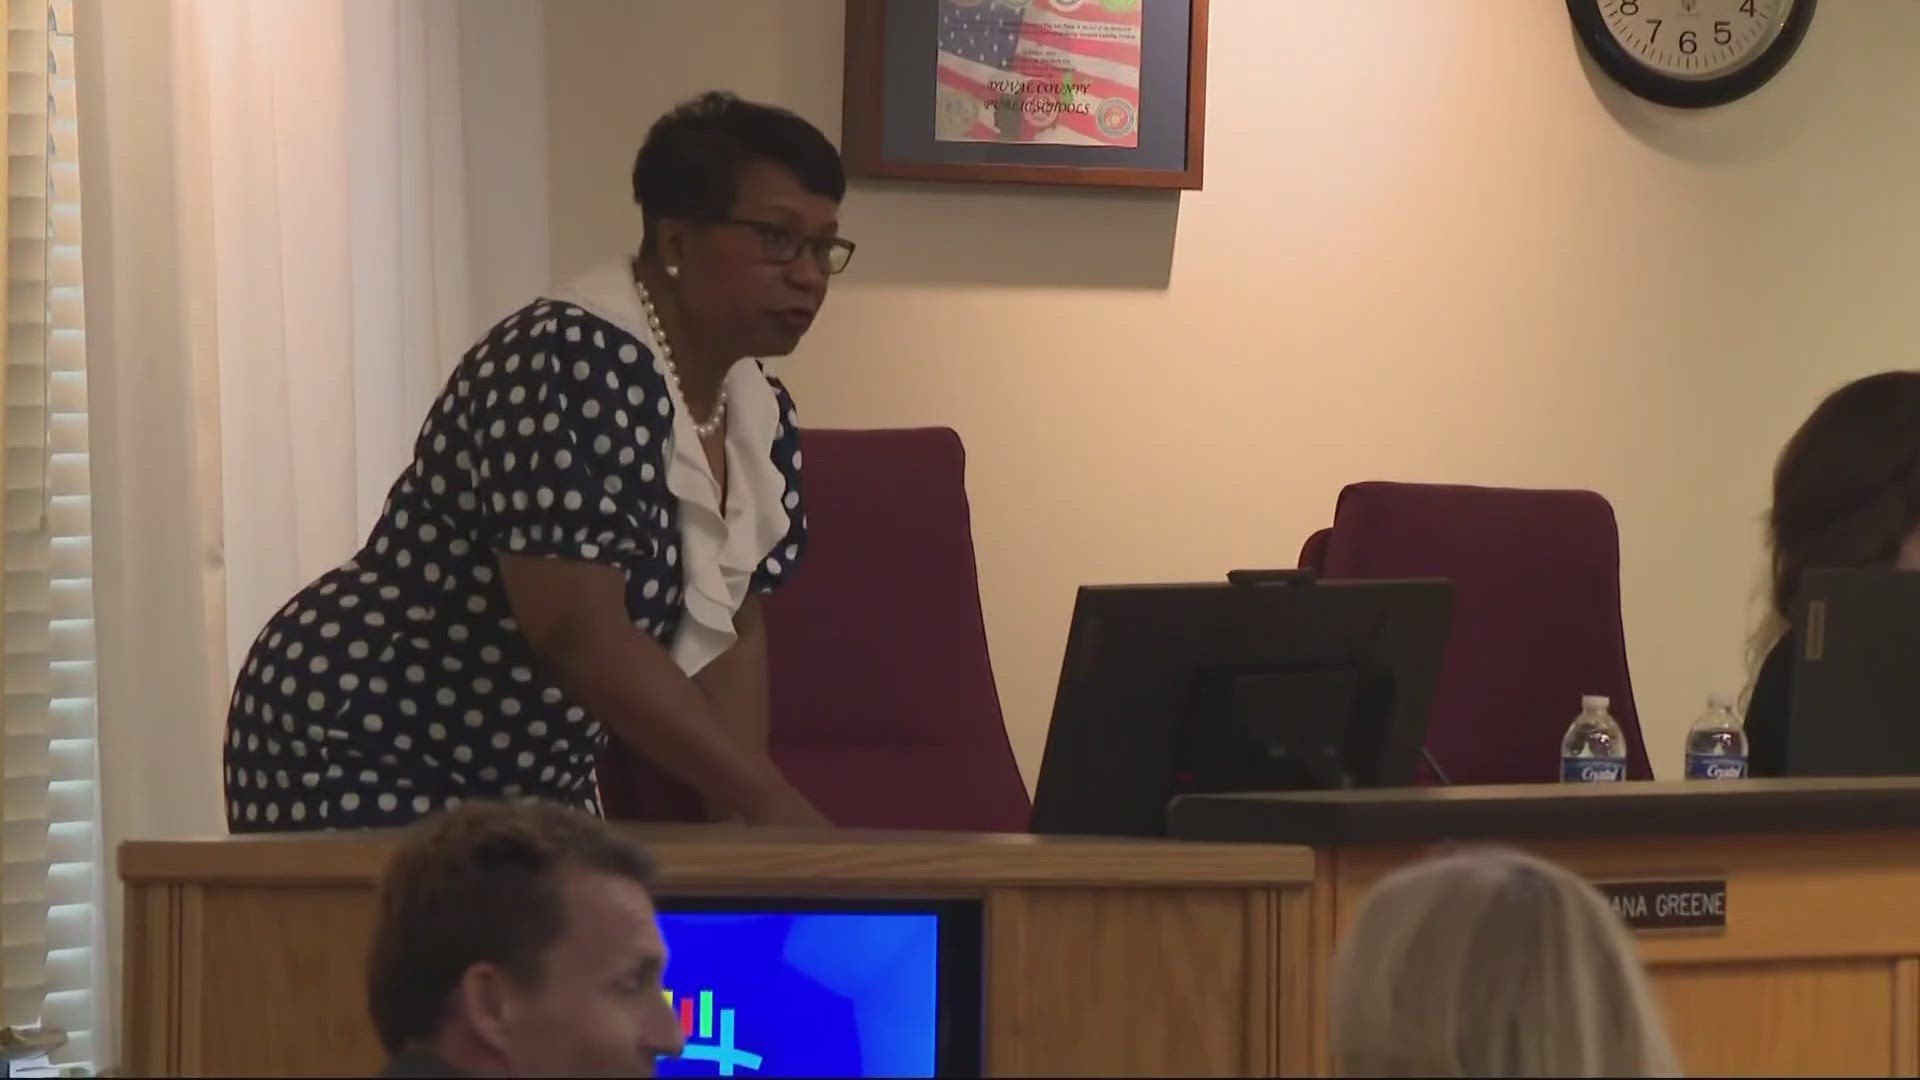 The Duval County School Board has agreed to sign a contract with Greene which will allow her to retire.